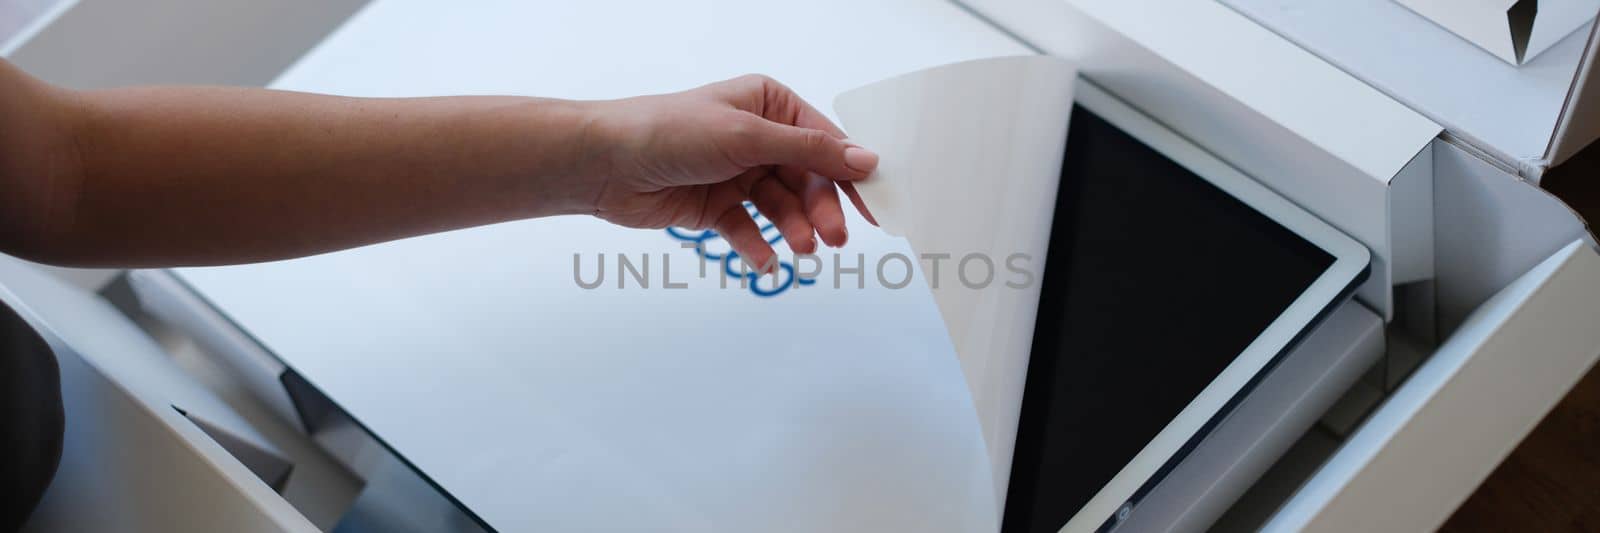 Tbilisi, Georgia - June 21, 2022: Person removes the protective film from new New iMac monitor by kuprevich